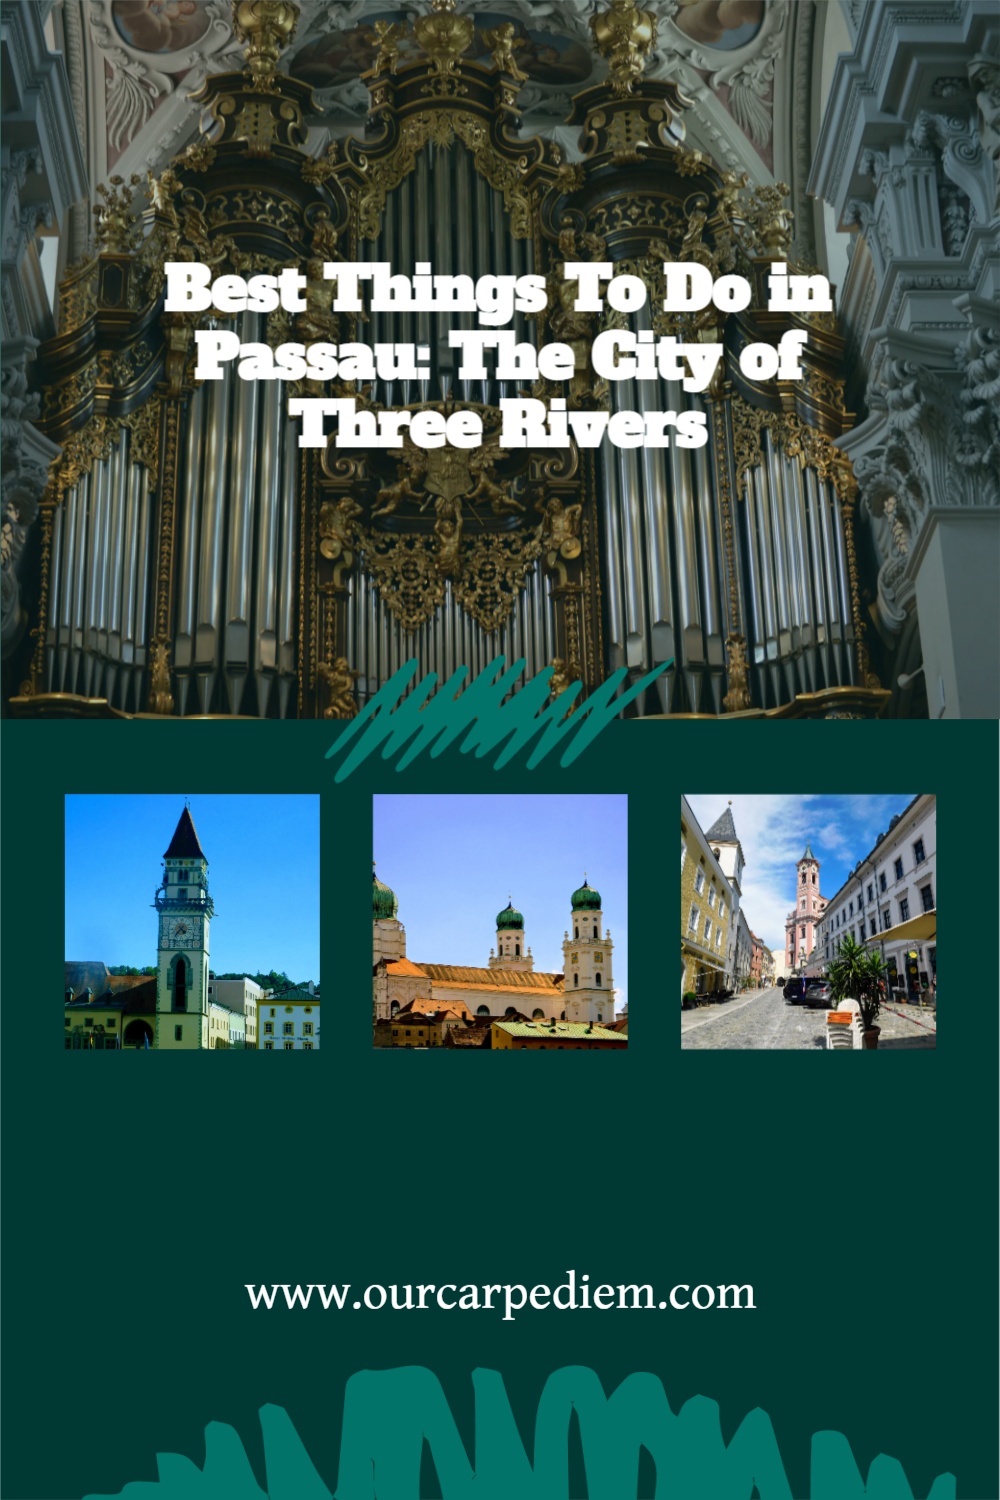 How to Explore Passau (Pittsburgh of Germany) with Ease and Enjoyment